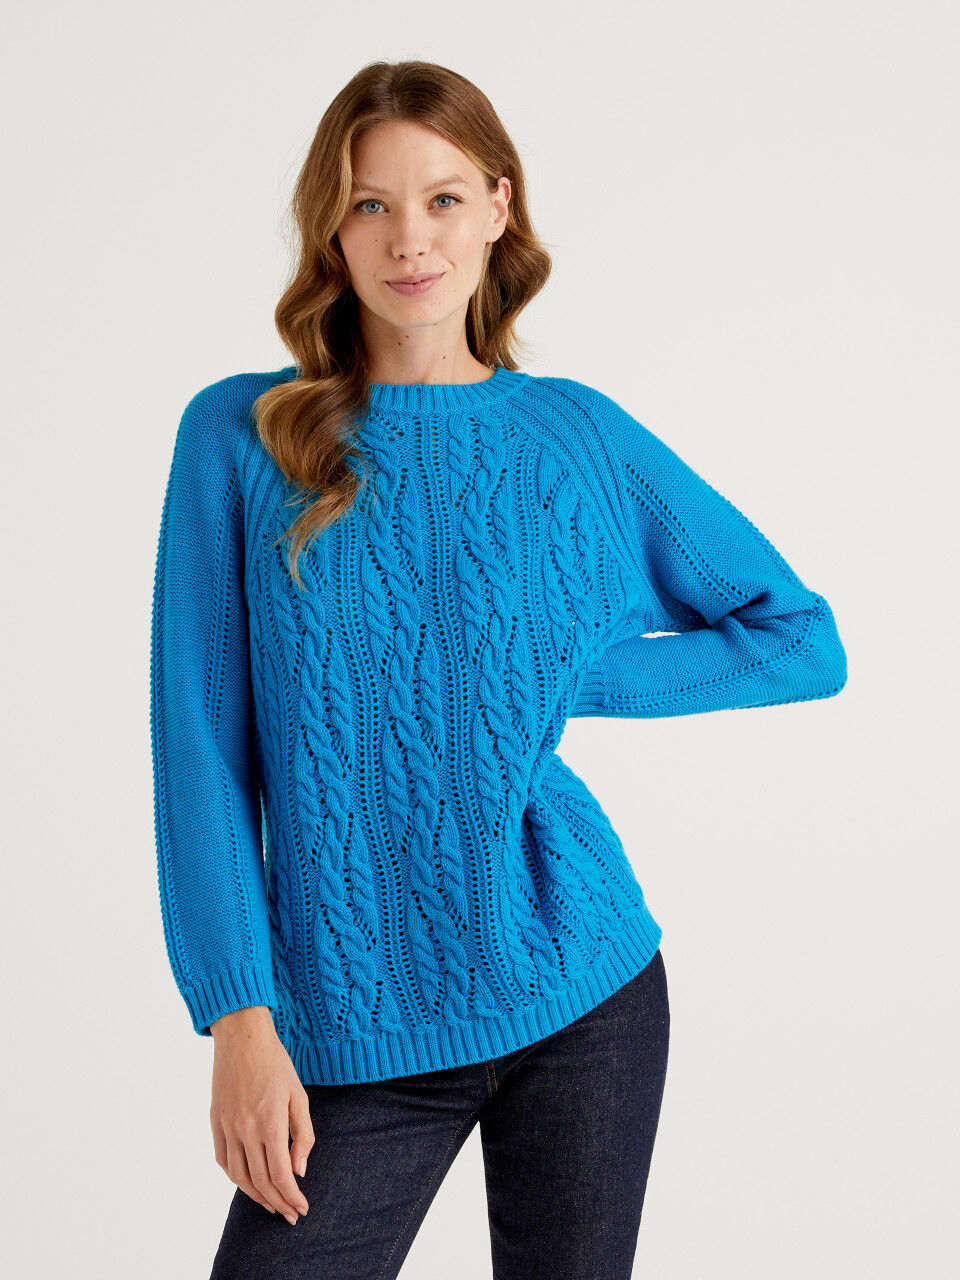 Trussardi Wool Sweater in Dark Blue Blue Womens Clothing Jumpers and knitwear Sleeveless jumpers 